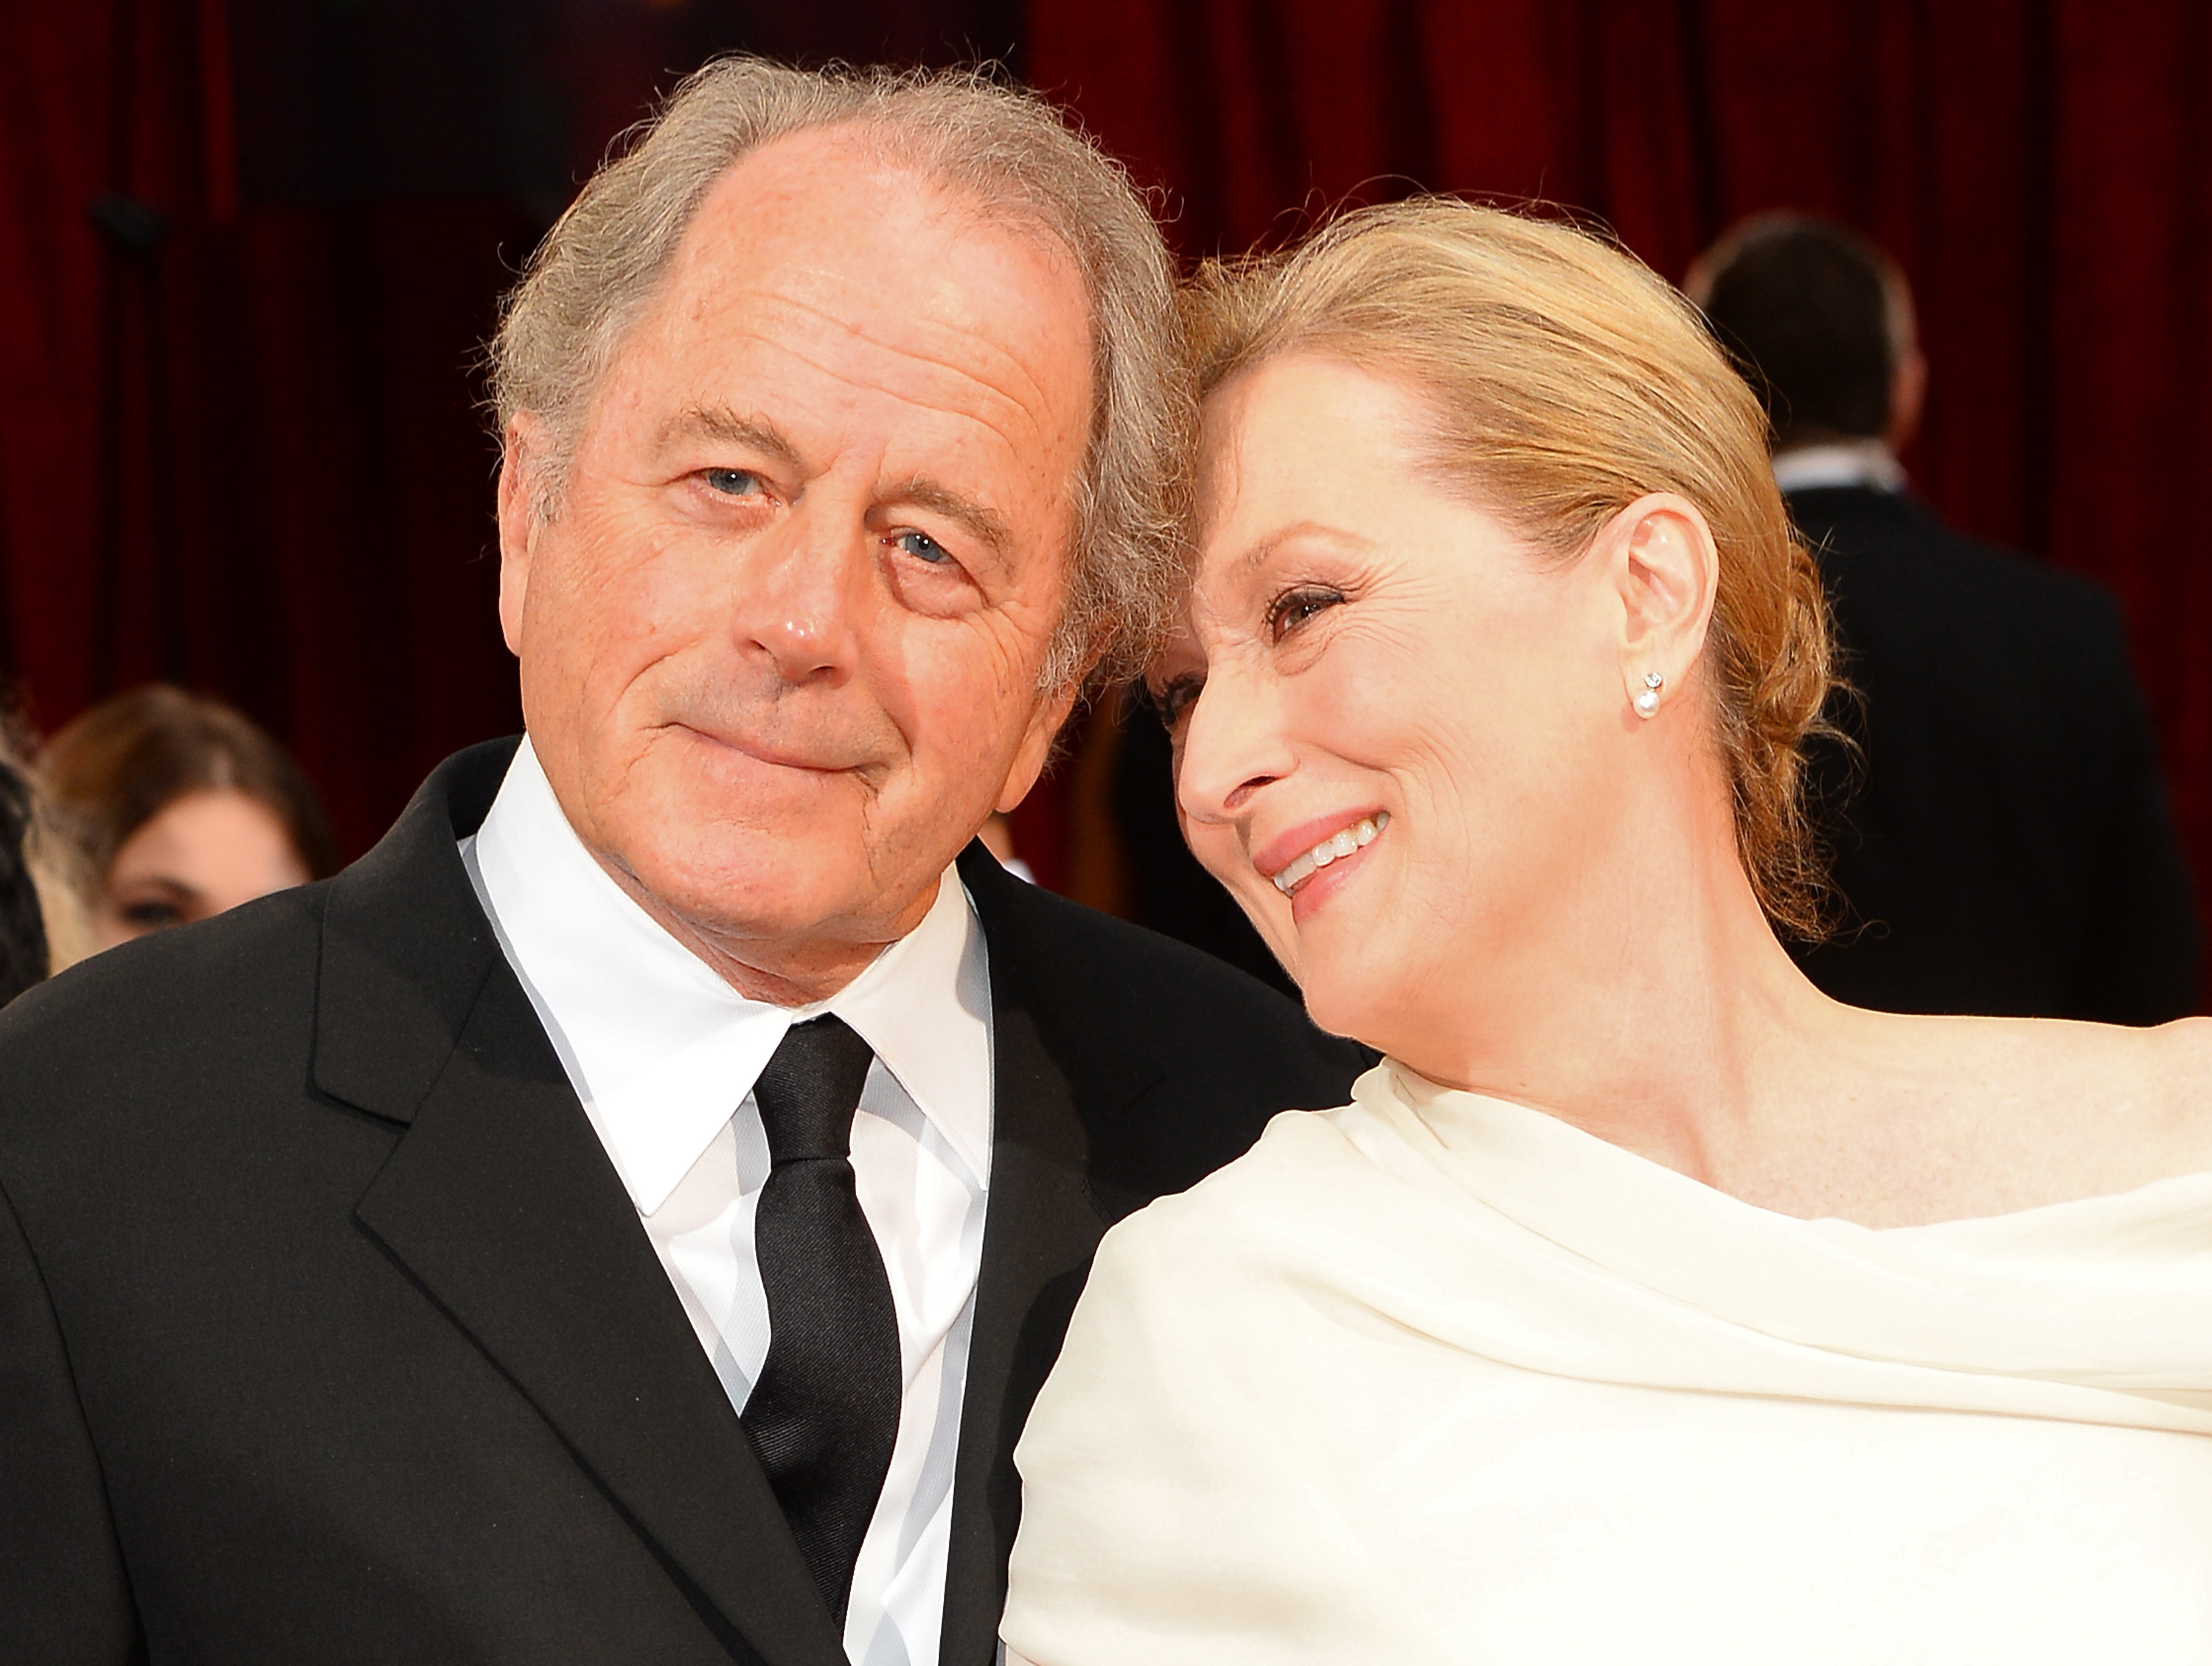 Meryl Streep and Don Gummer at the Oscars at Hollywood & Highland Center on March 2, 2014 in Hollywood, California. | Source: Getty Images